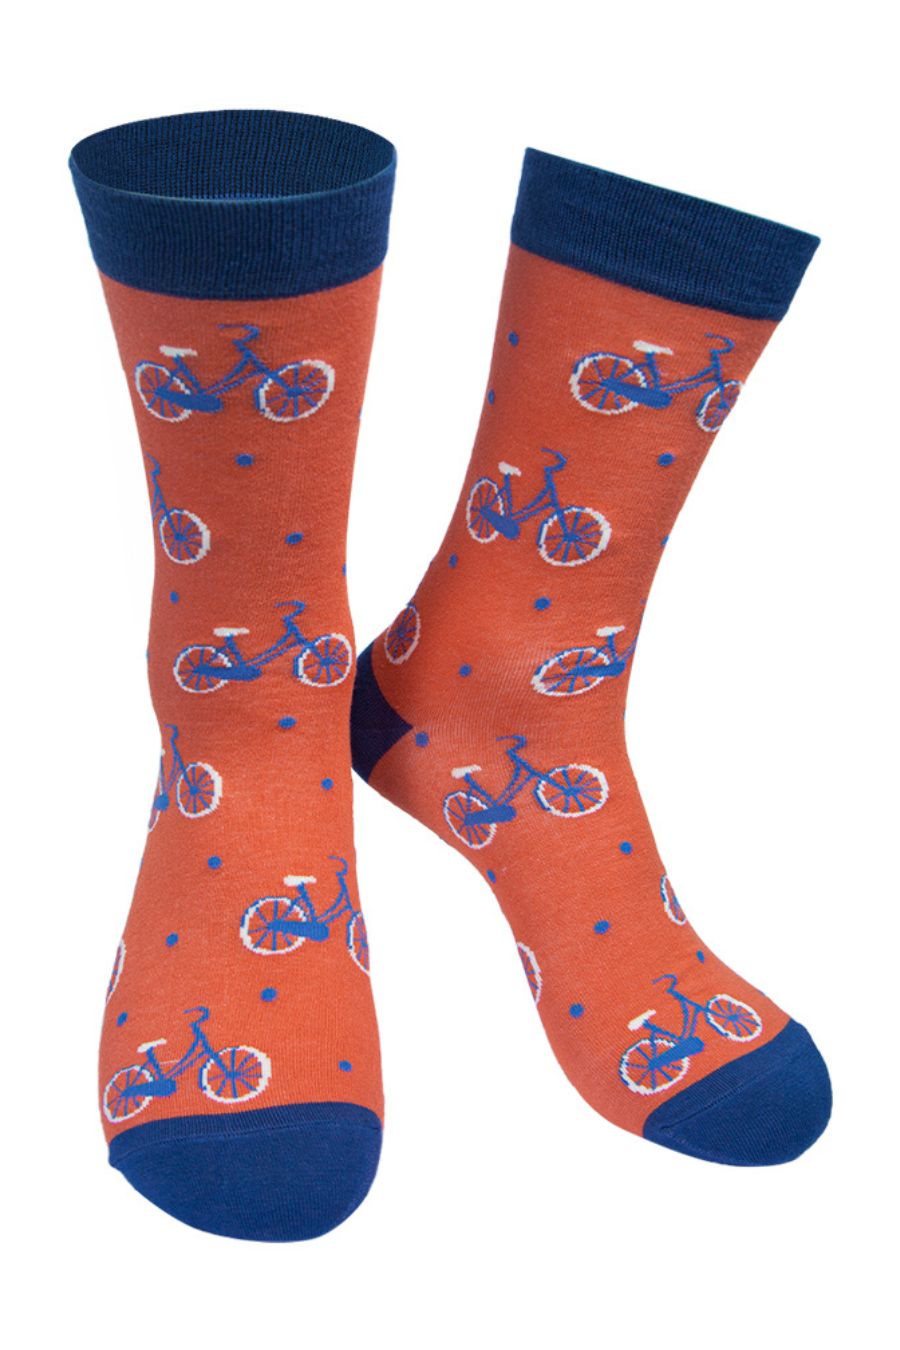 orange and blue men's bamboo dress socks with an all over bicylce print pattern